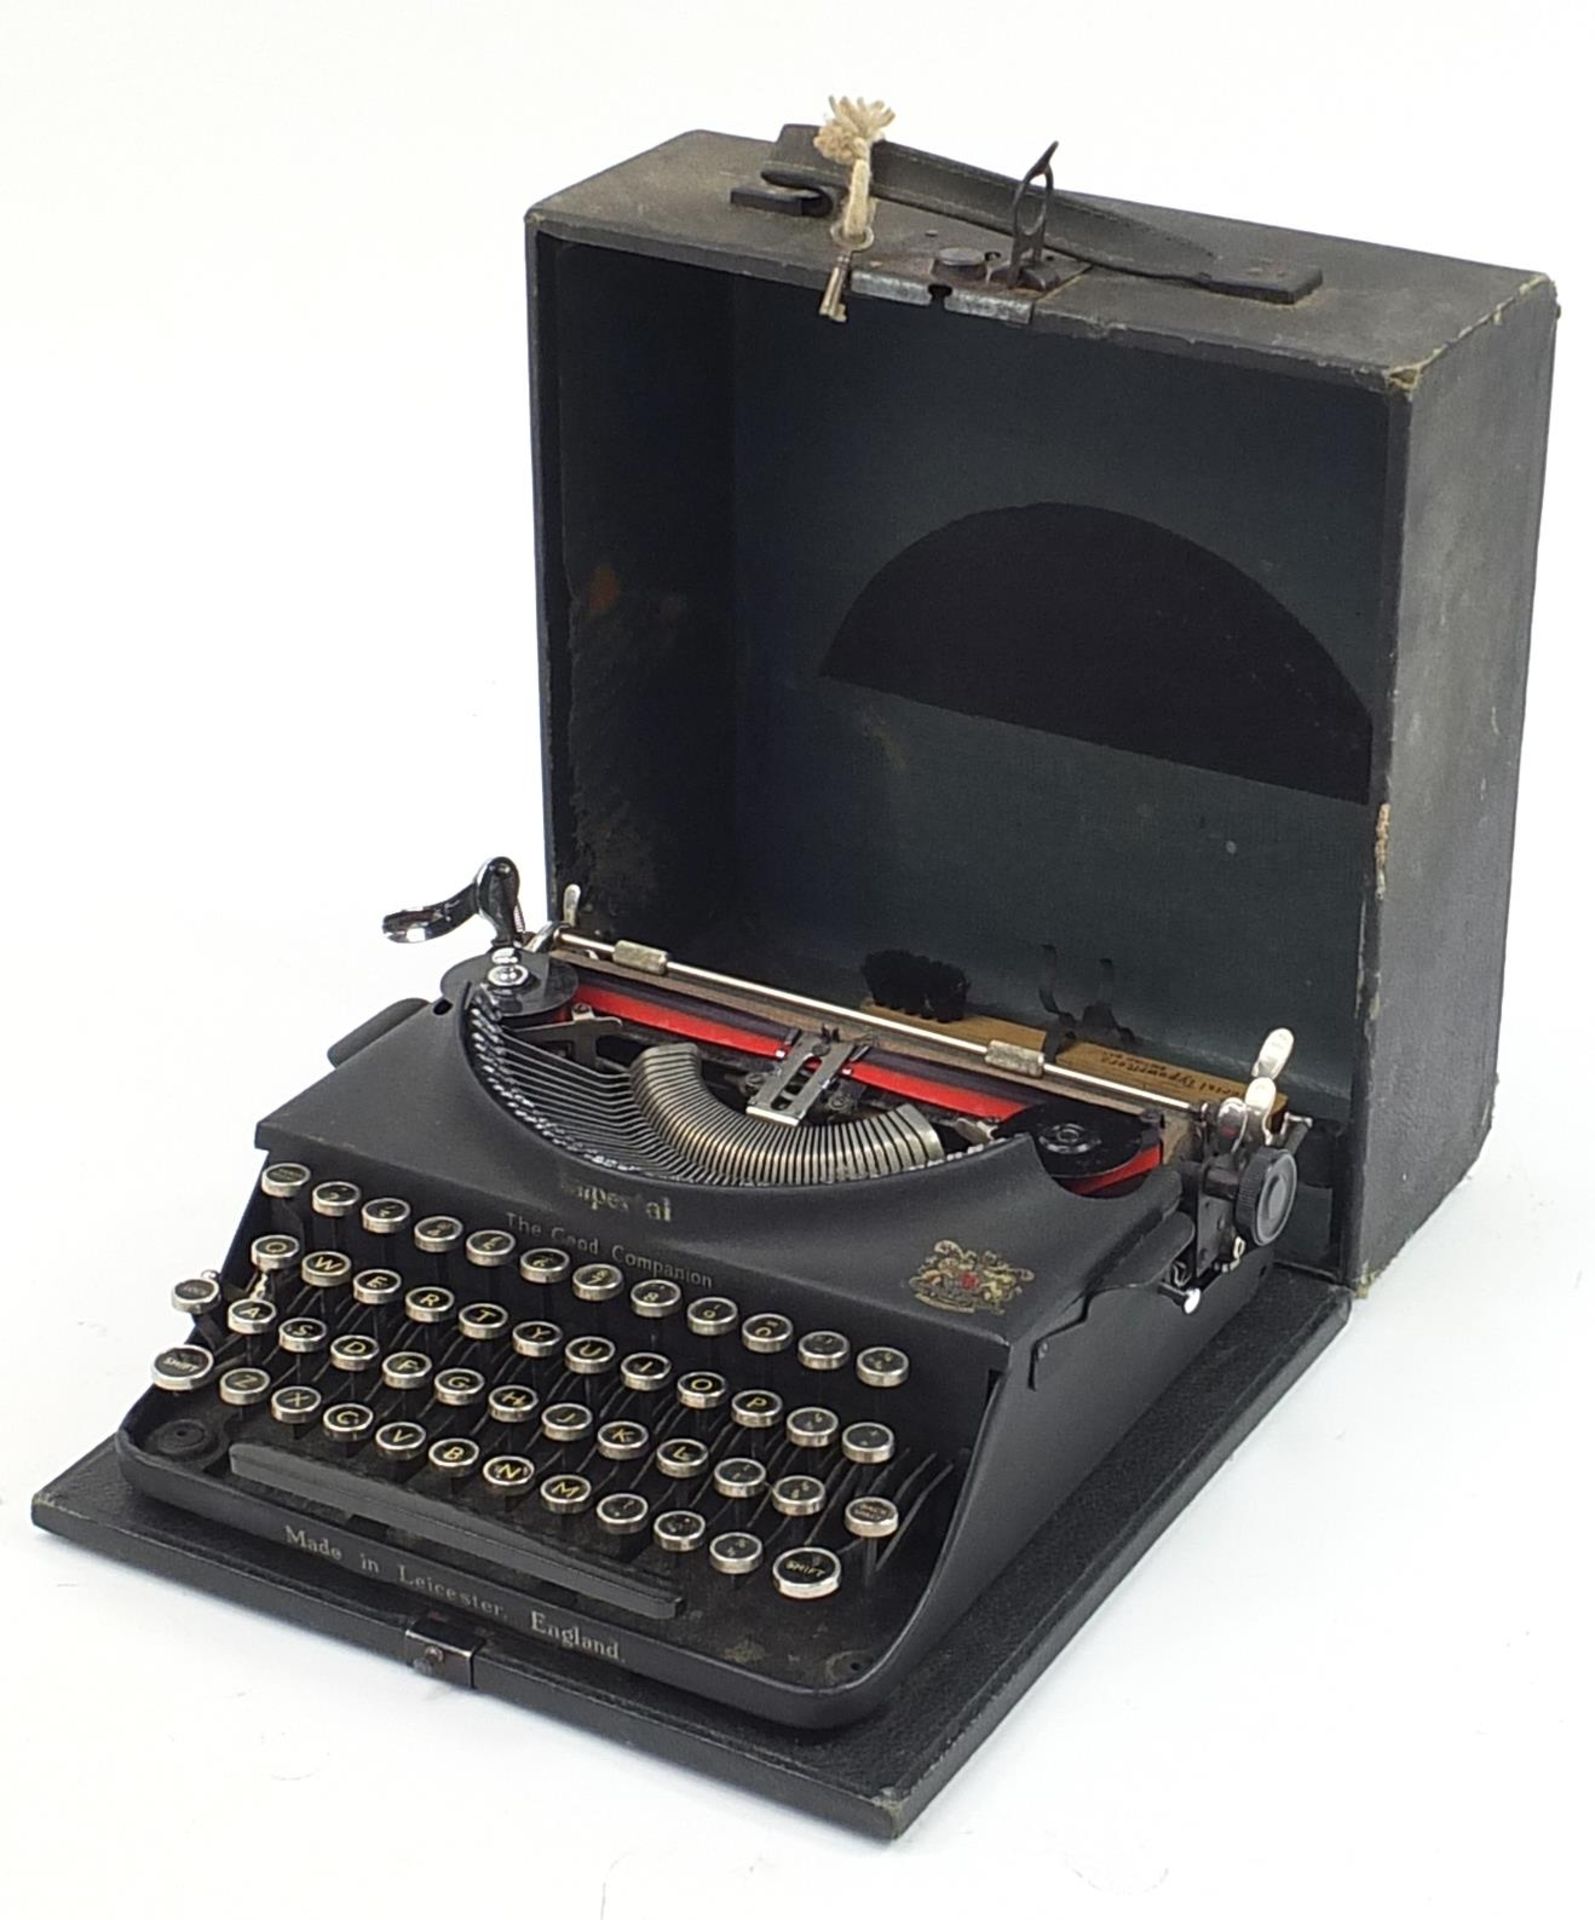 Vintage Imperial portable typewriter with case, 29.5cm wide